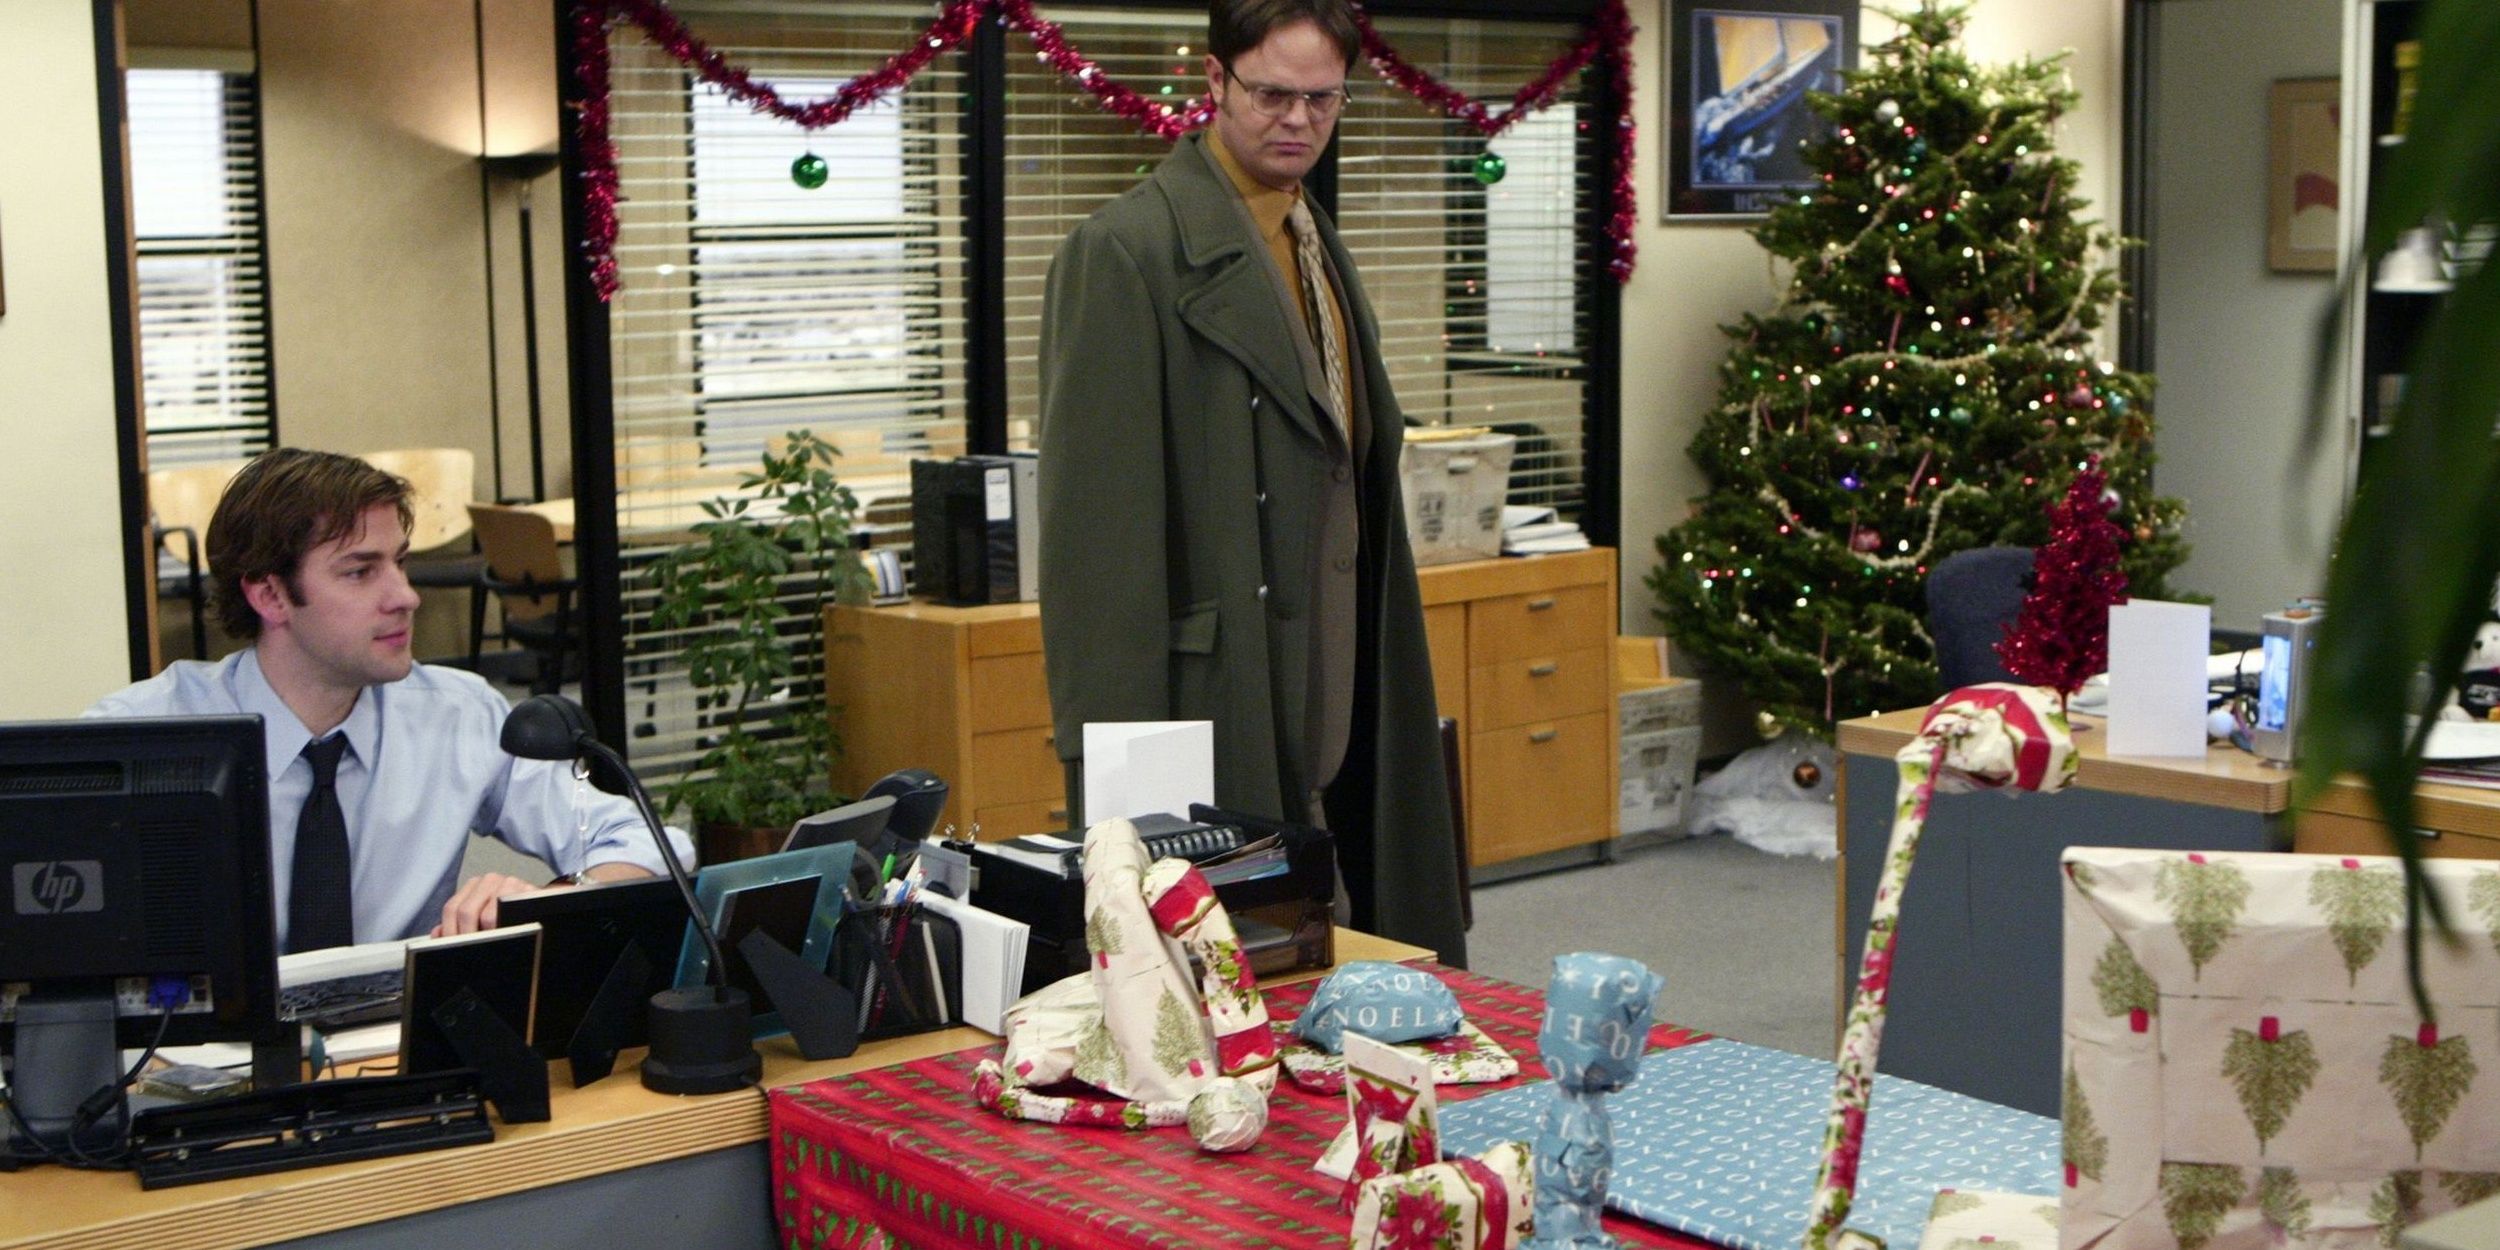 Jim gift wrapping Dwight's desk in The Office